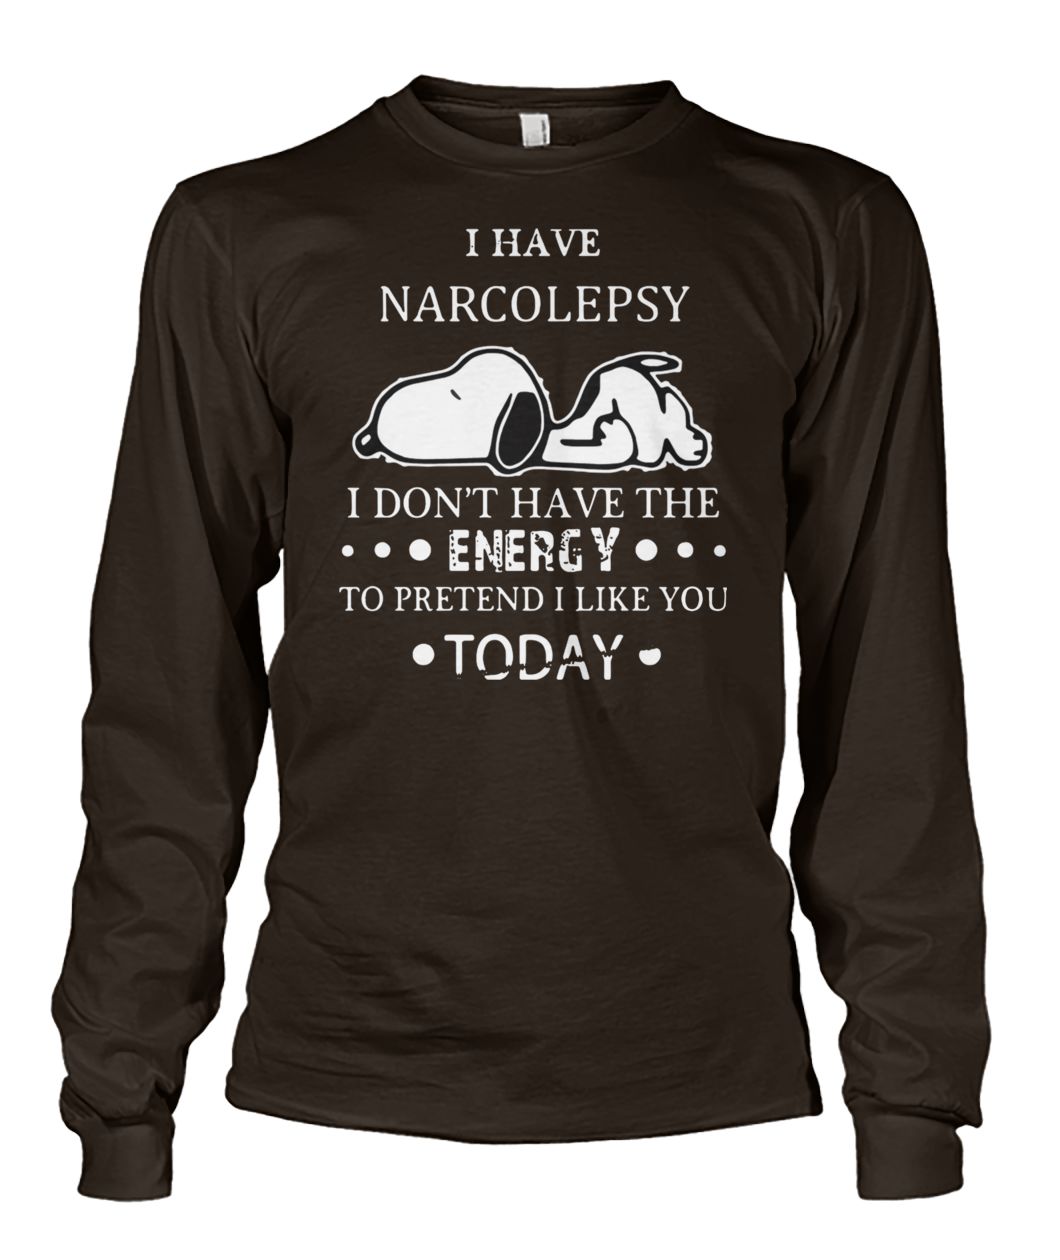 Snoopy I have narcolepsy I don't have the energy to pretend I like you today unisex long sleeve